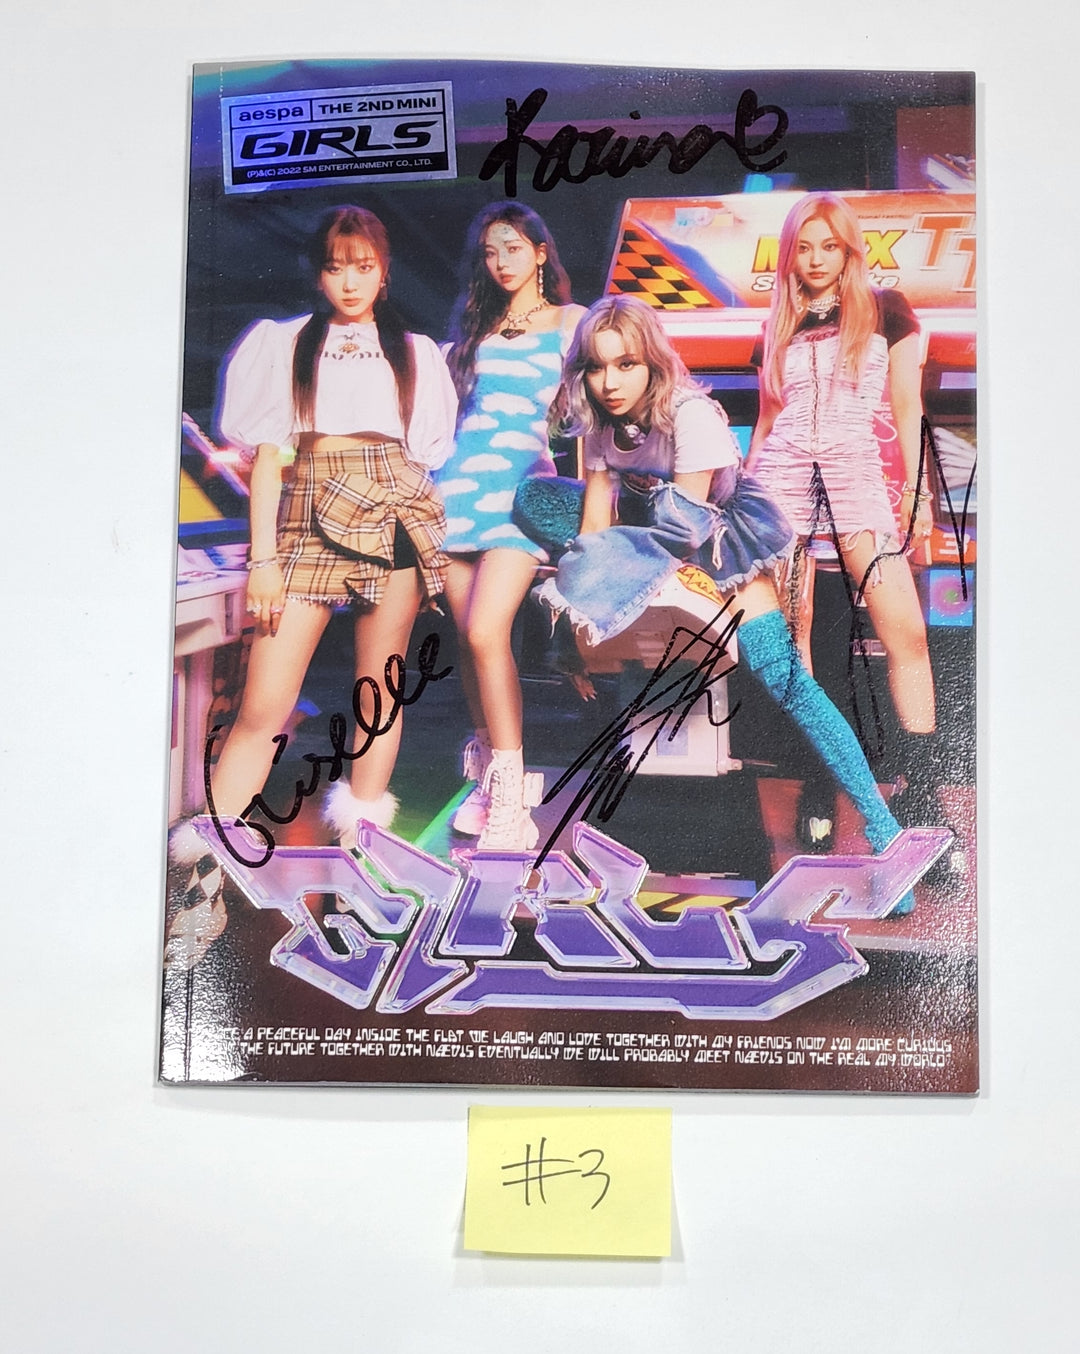 Aespa "Girls" - Hand Autographed(Signed) Promo Album - Must Read!